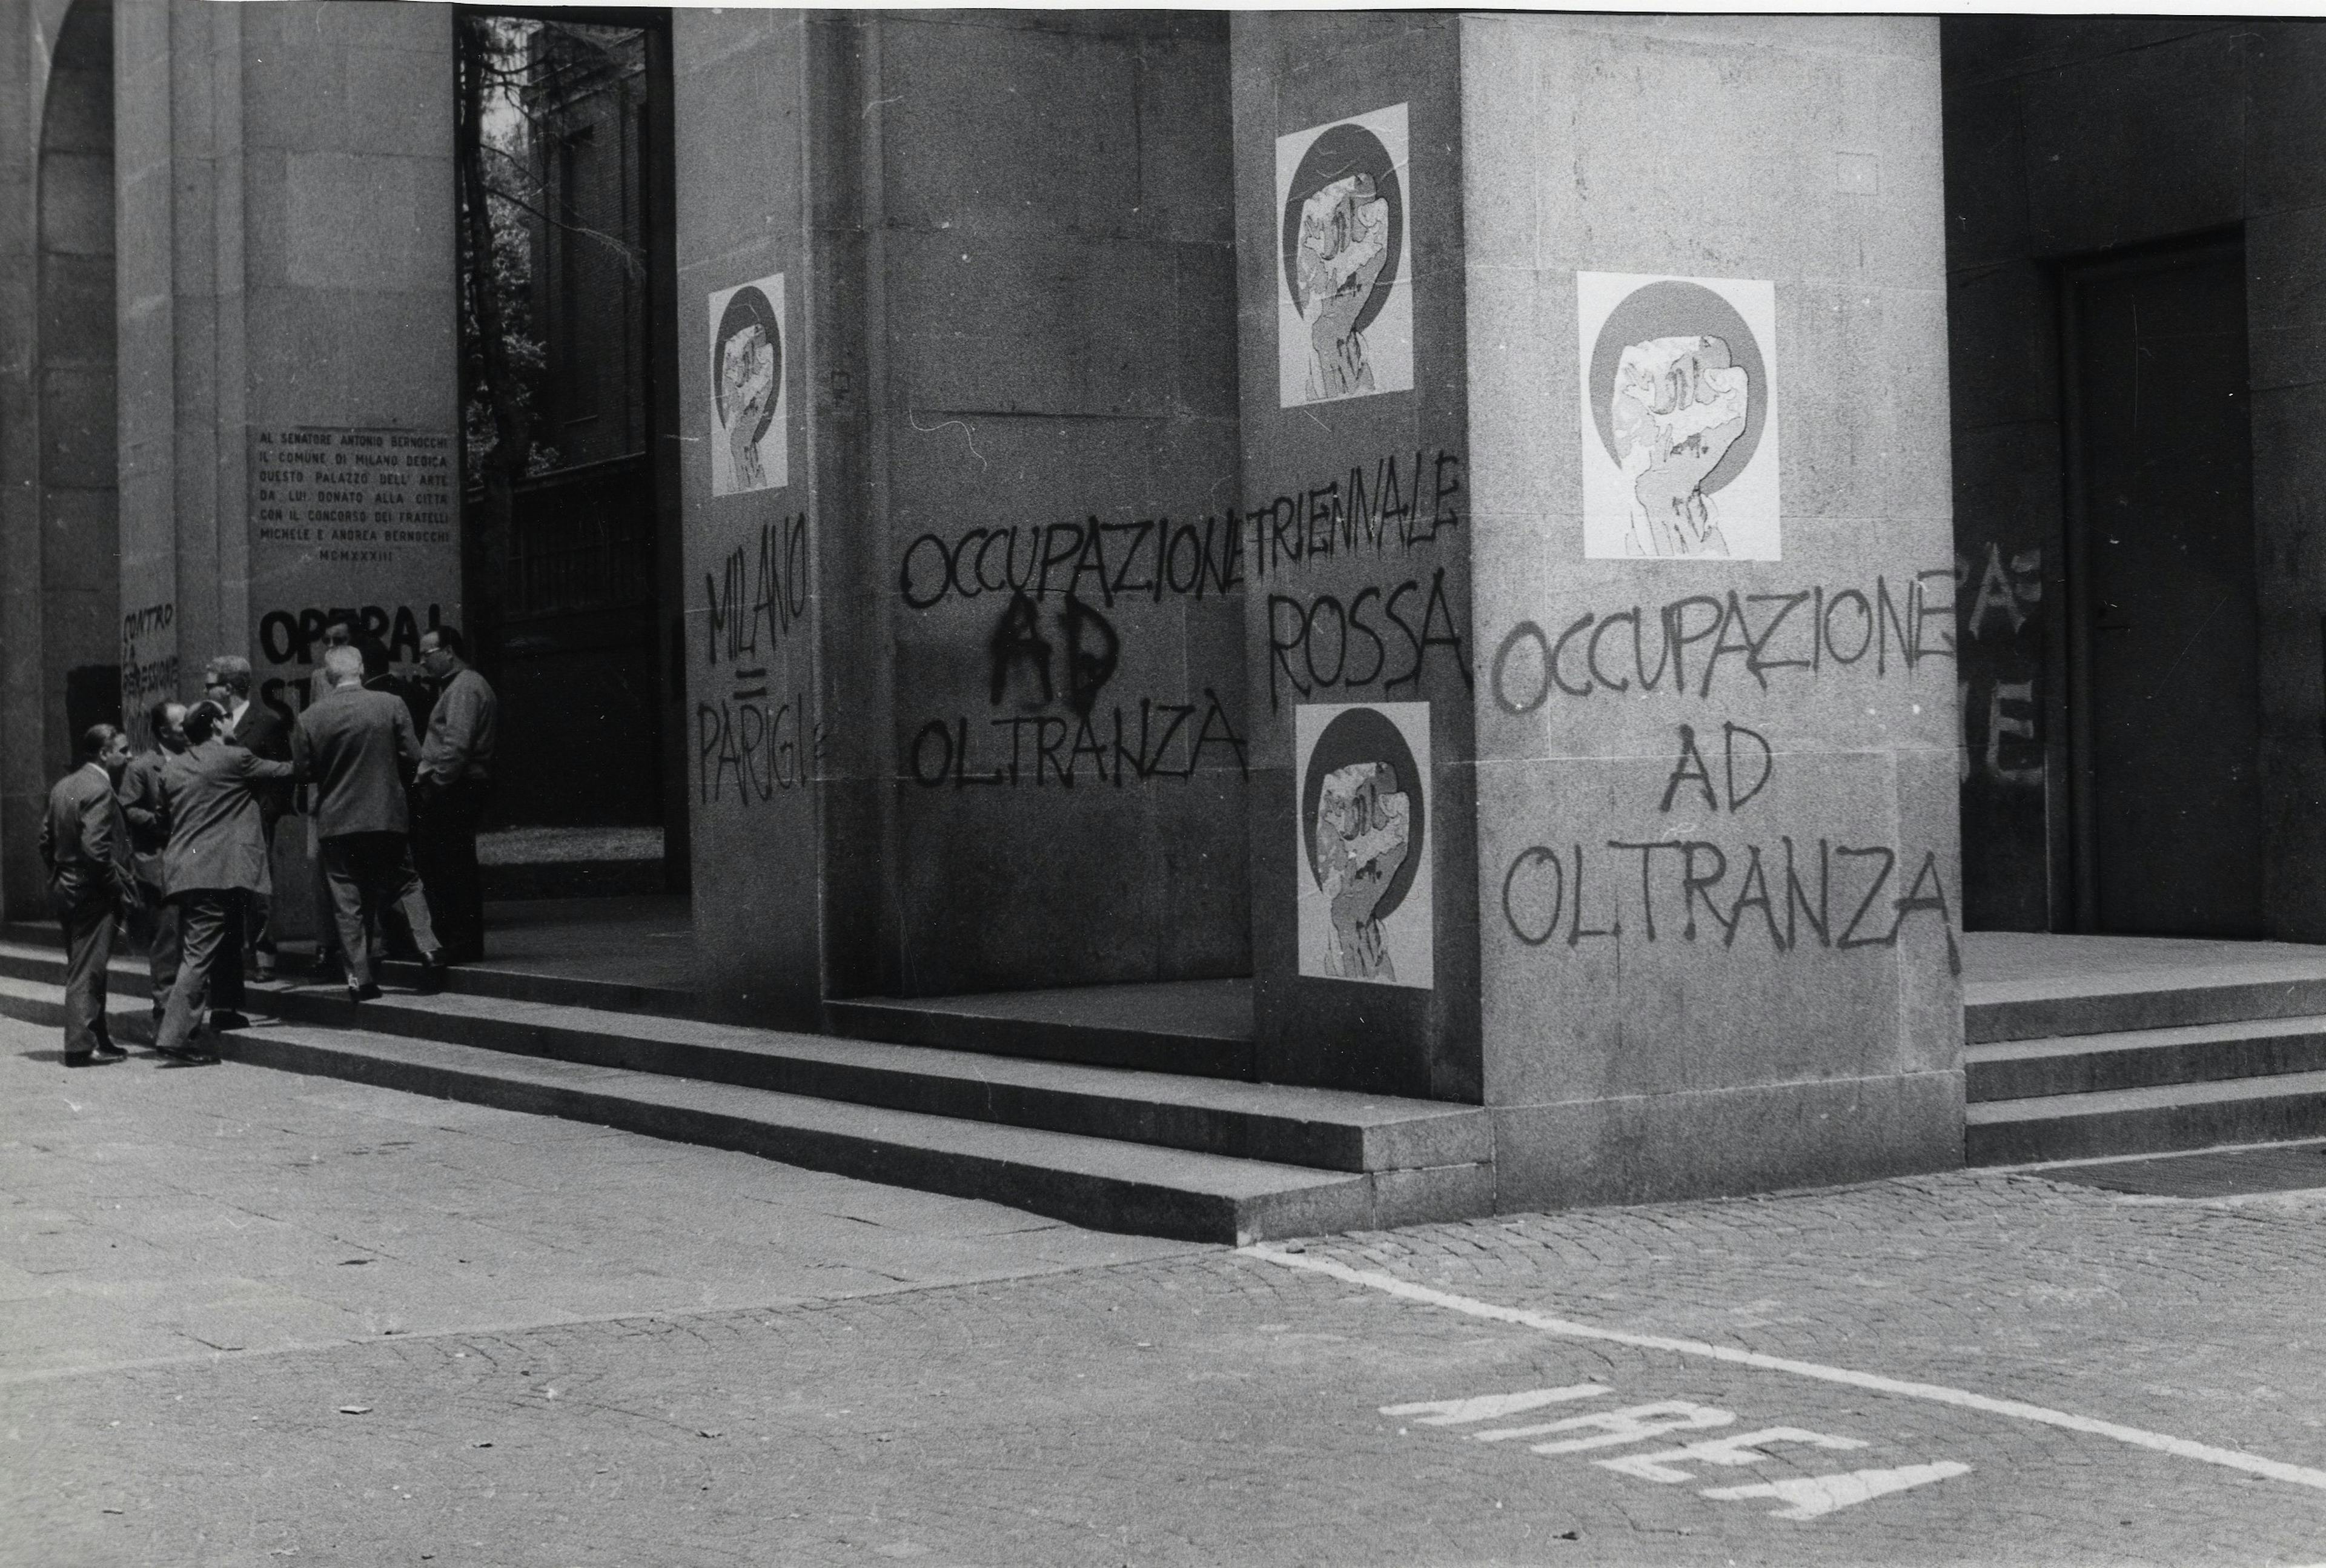 1968: Protests at the opening of the 14th Triennale